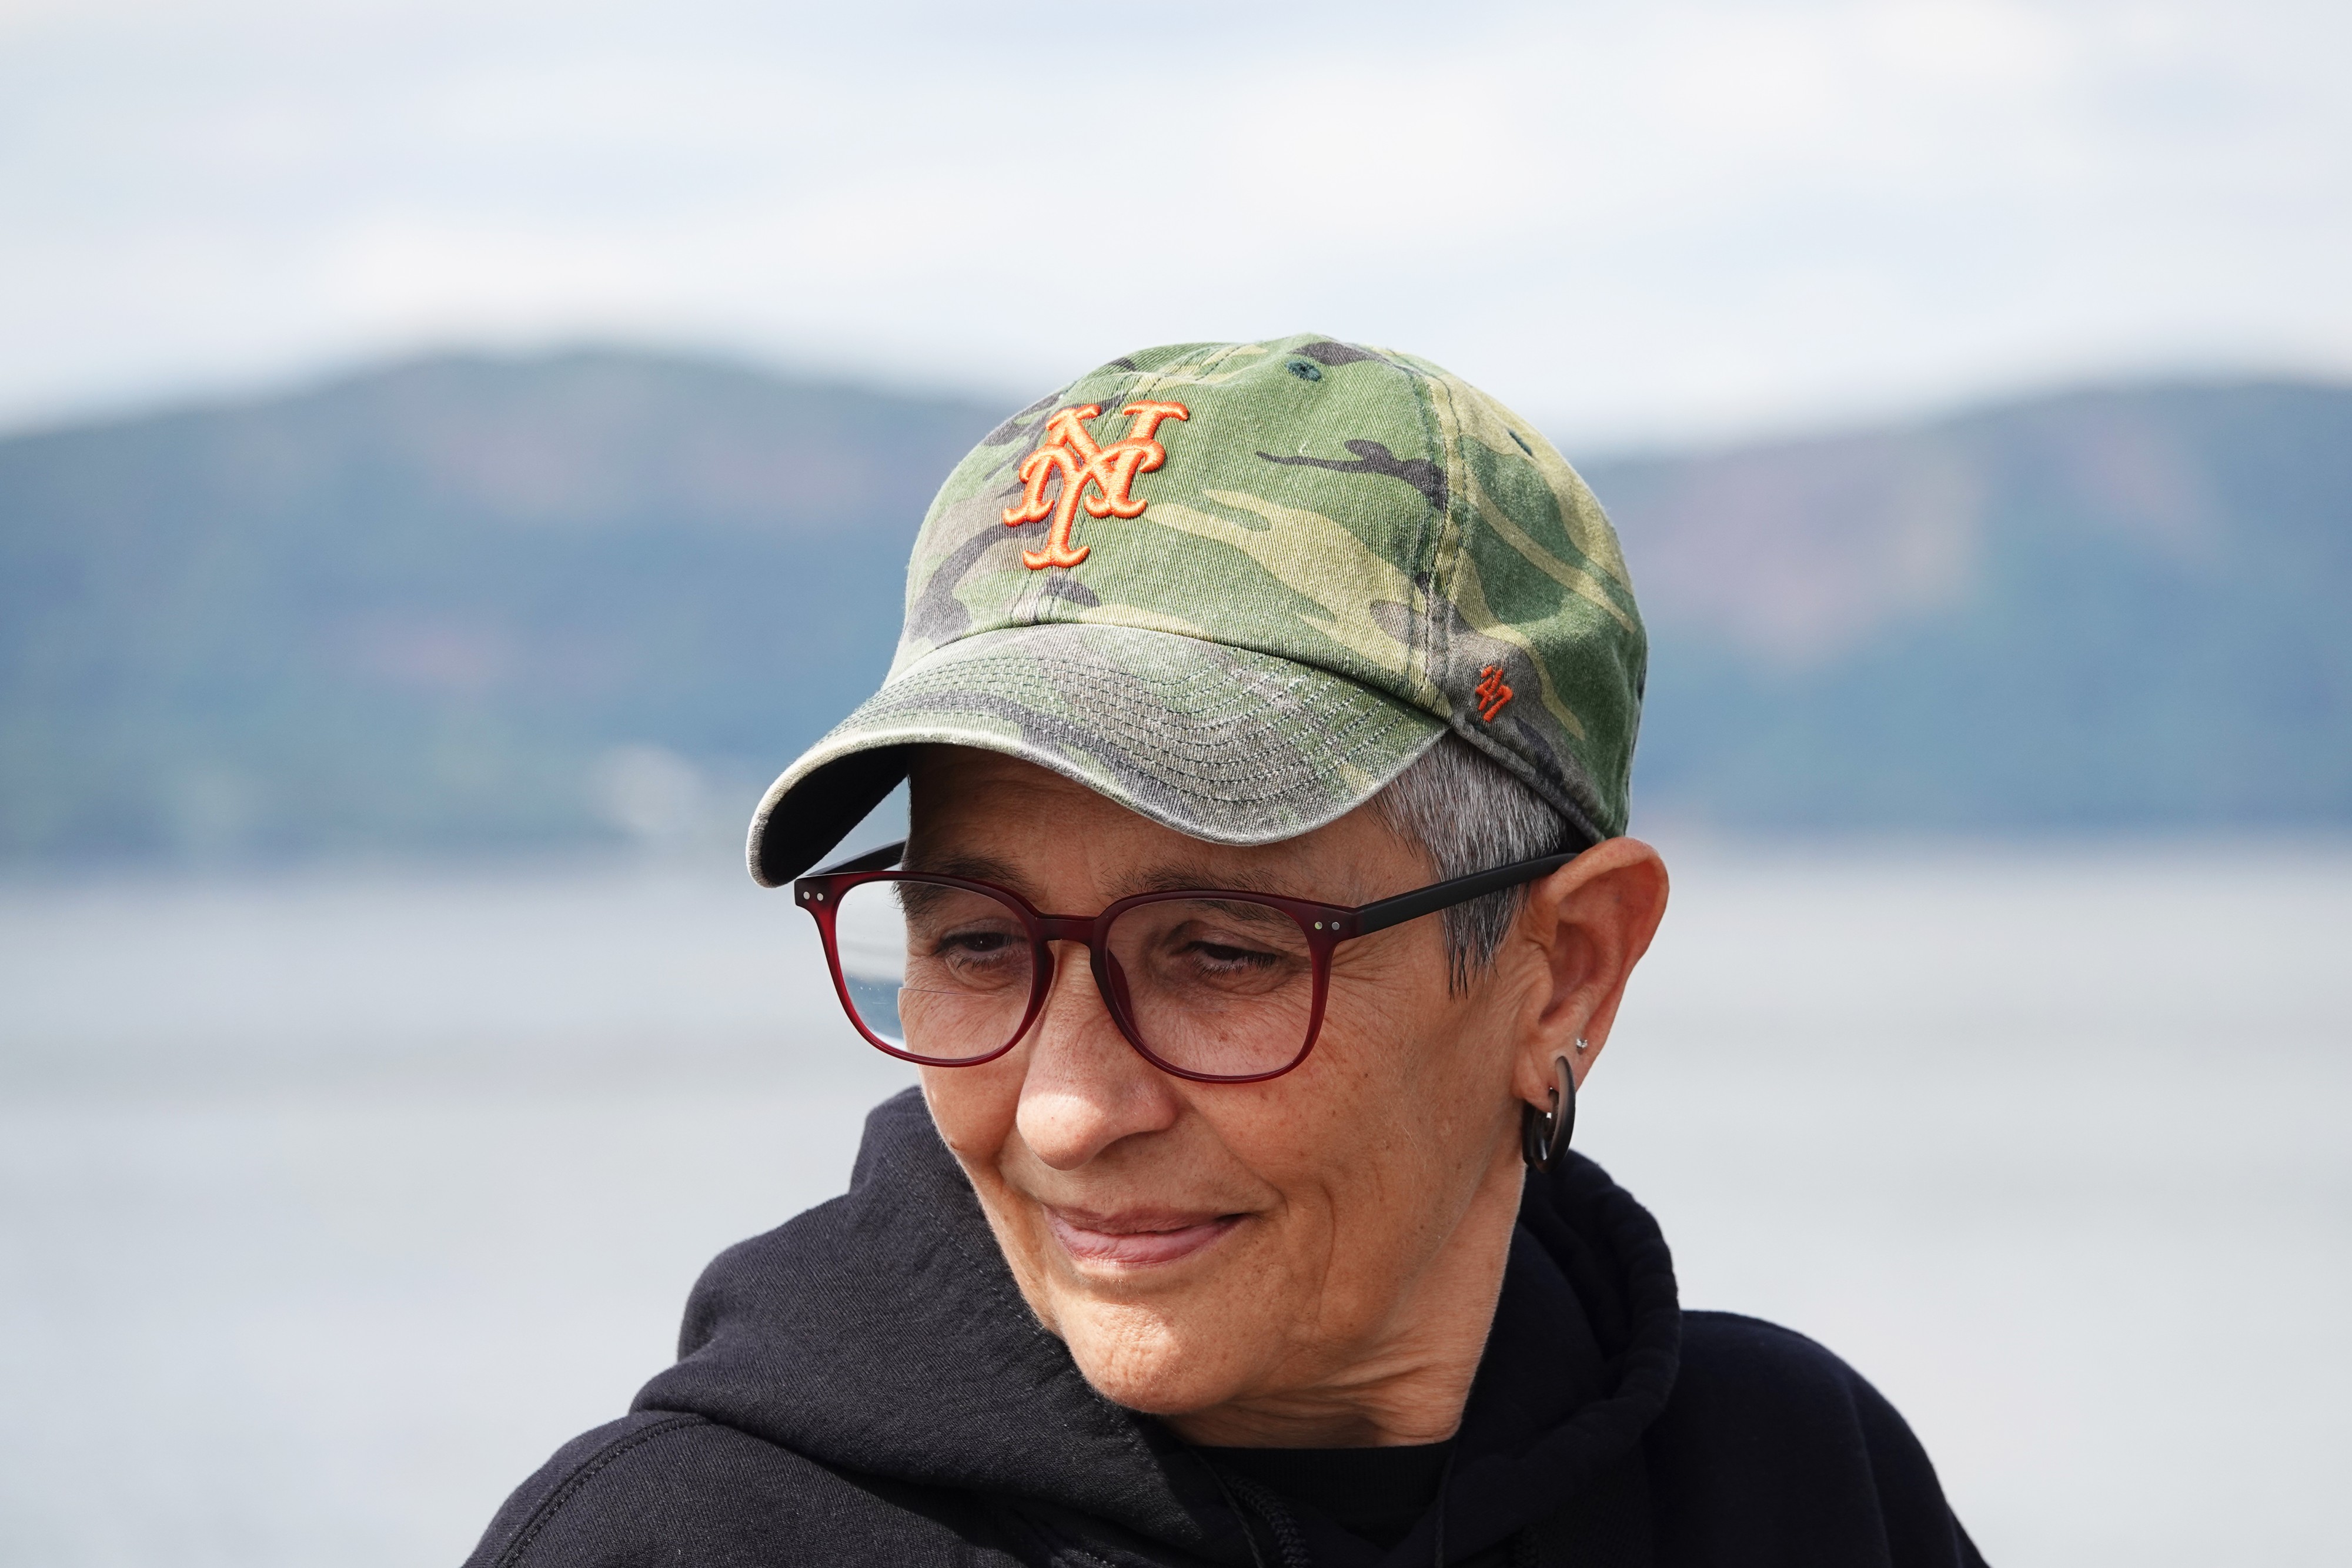 Nicole Peyrafitte is shown in a landscape-oriented color photograph, cropped from the shoulders up. She is wearing a black hoodie, enamel glasses, spiral-shaped earrings that look like they're made out of glass, and a came baseball cap that has the NY symbol embroidered in the center of the brow in orange. She is looking in a three-quarters angle, slightly downcast. Behind appears an out-of-focus lake with mountains behind.